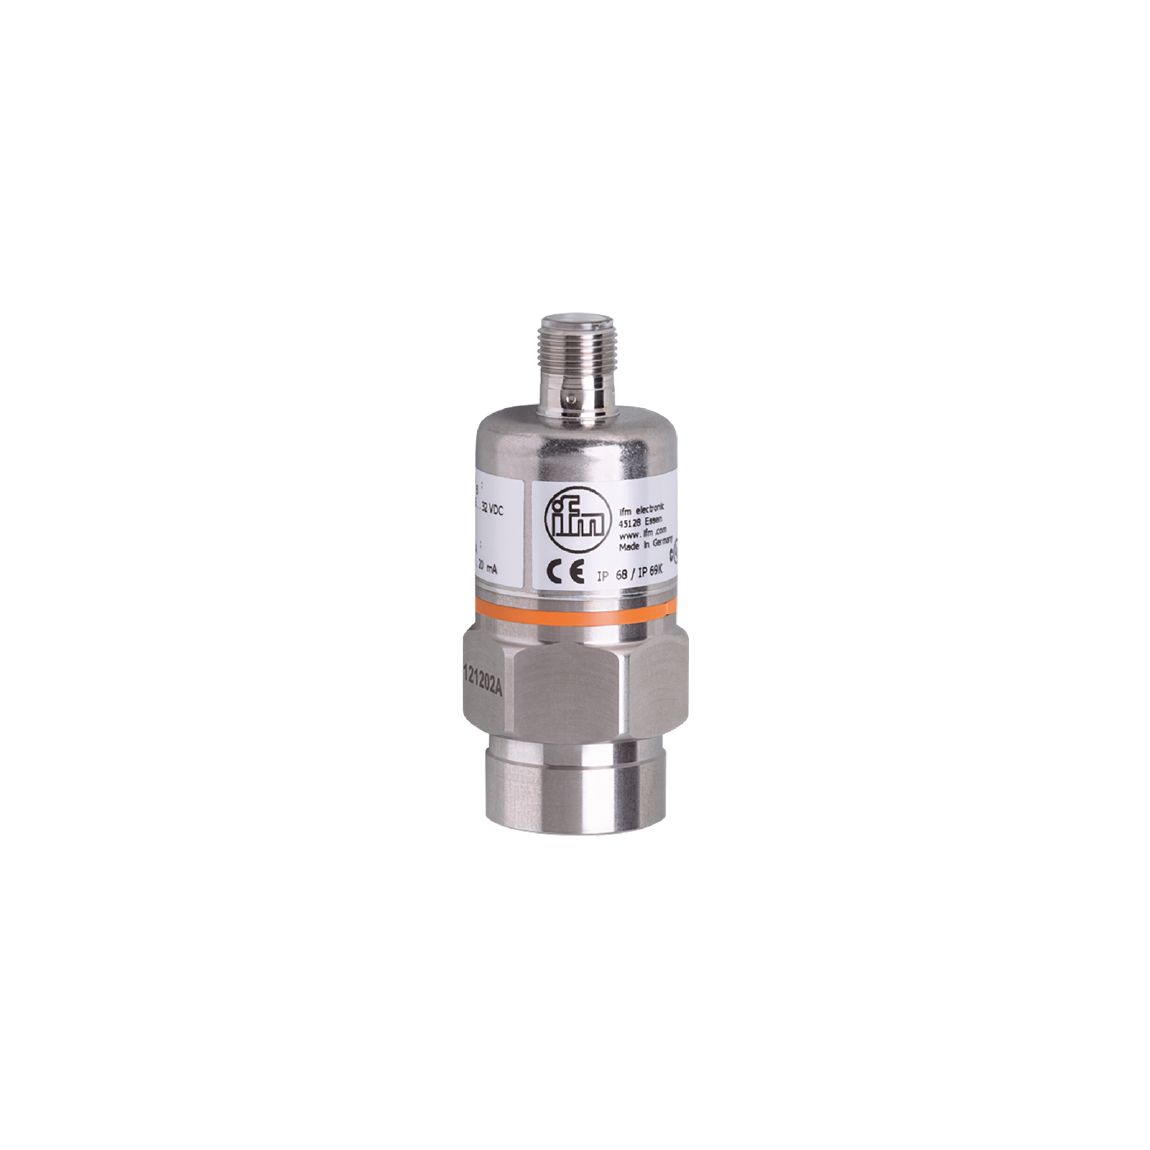 PA9029 - Pressure transmitter with ceramic measuring cell - ifm